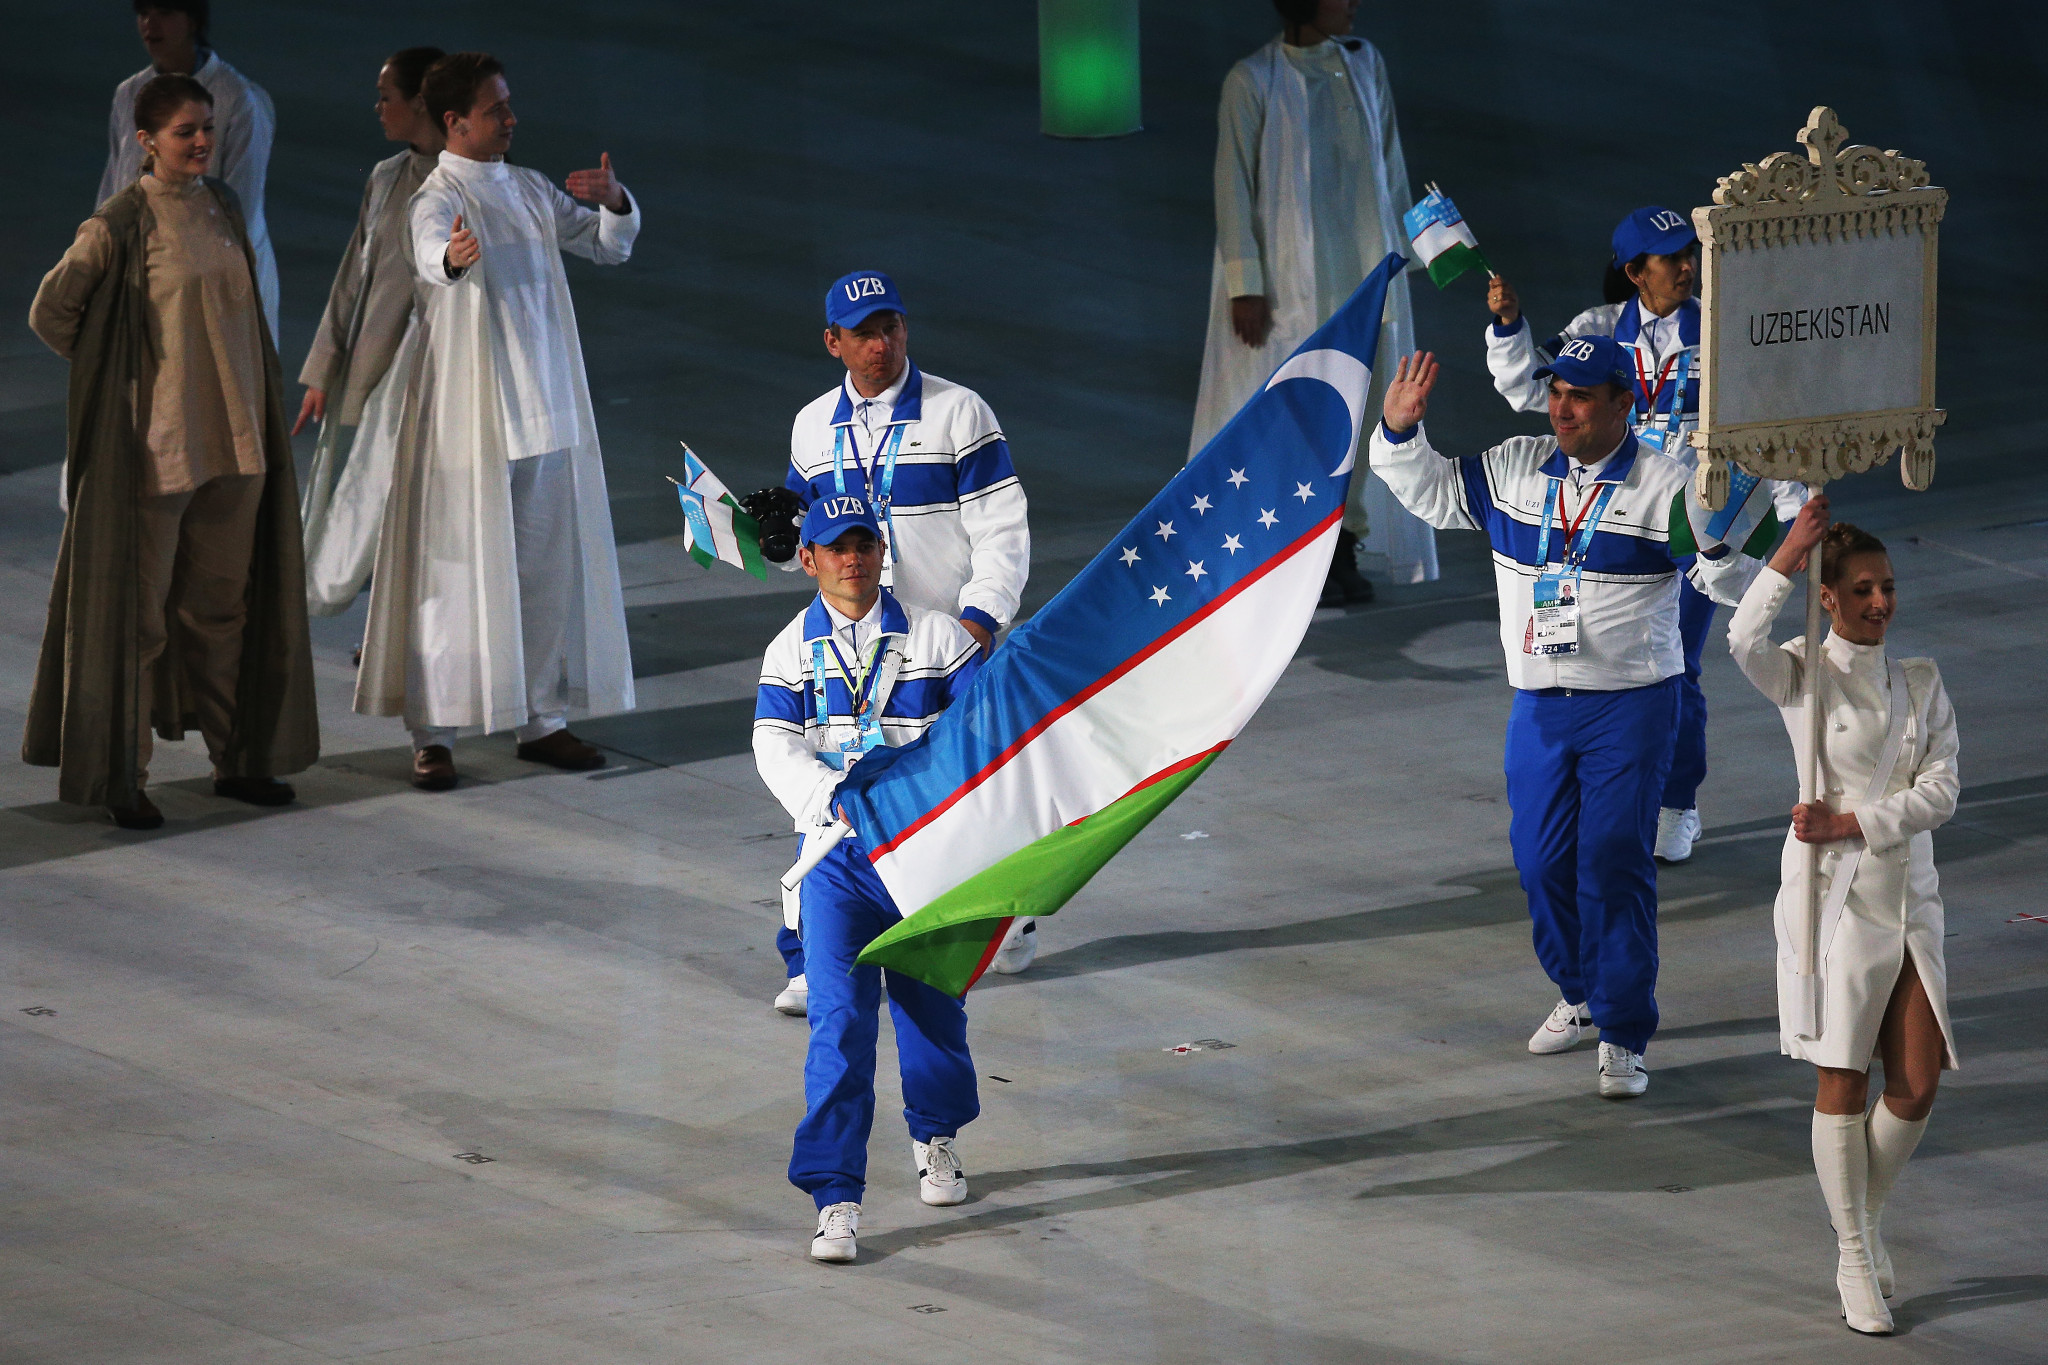 Uzbekistan at the Opening Ceremony of the Sochi 2014 Paralympics ©Getty Images